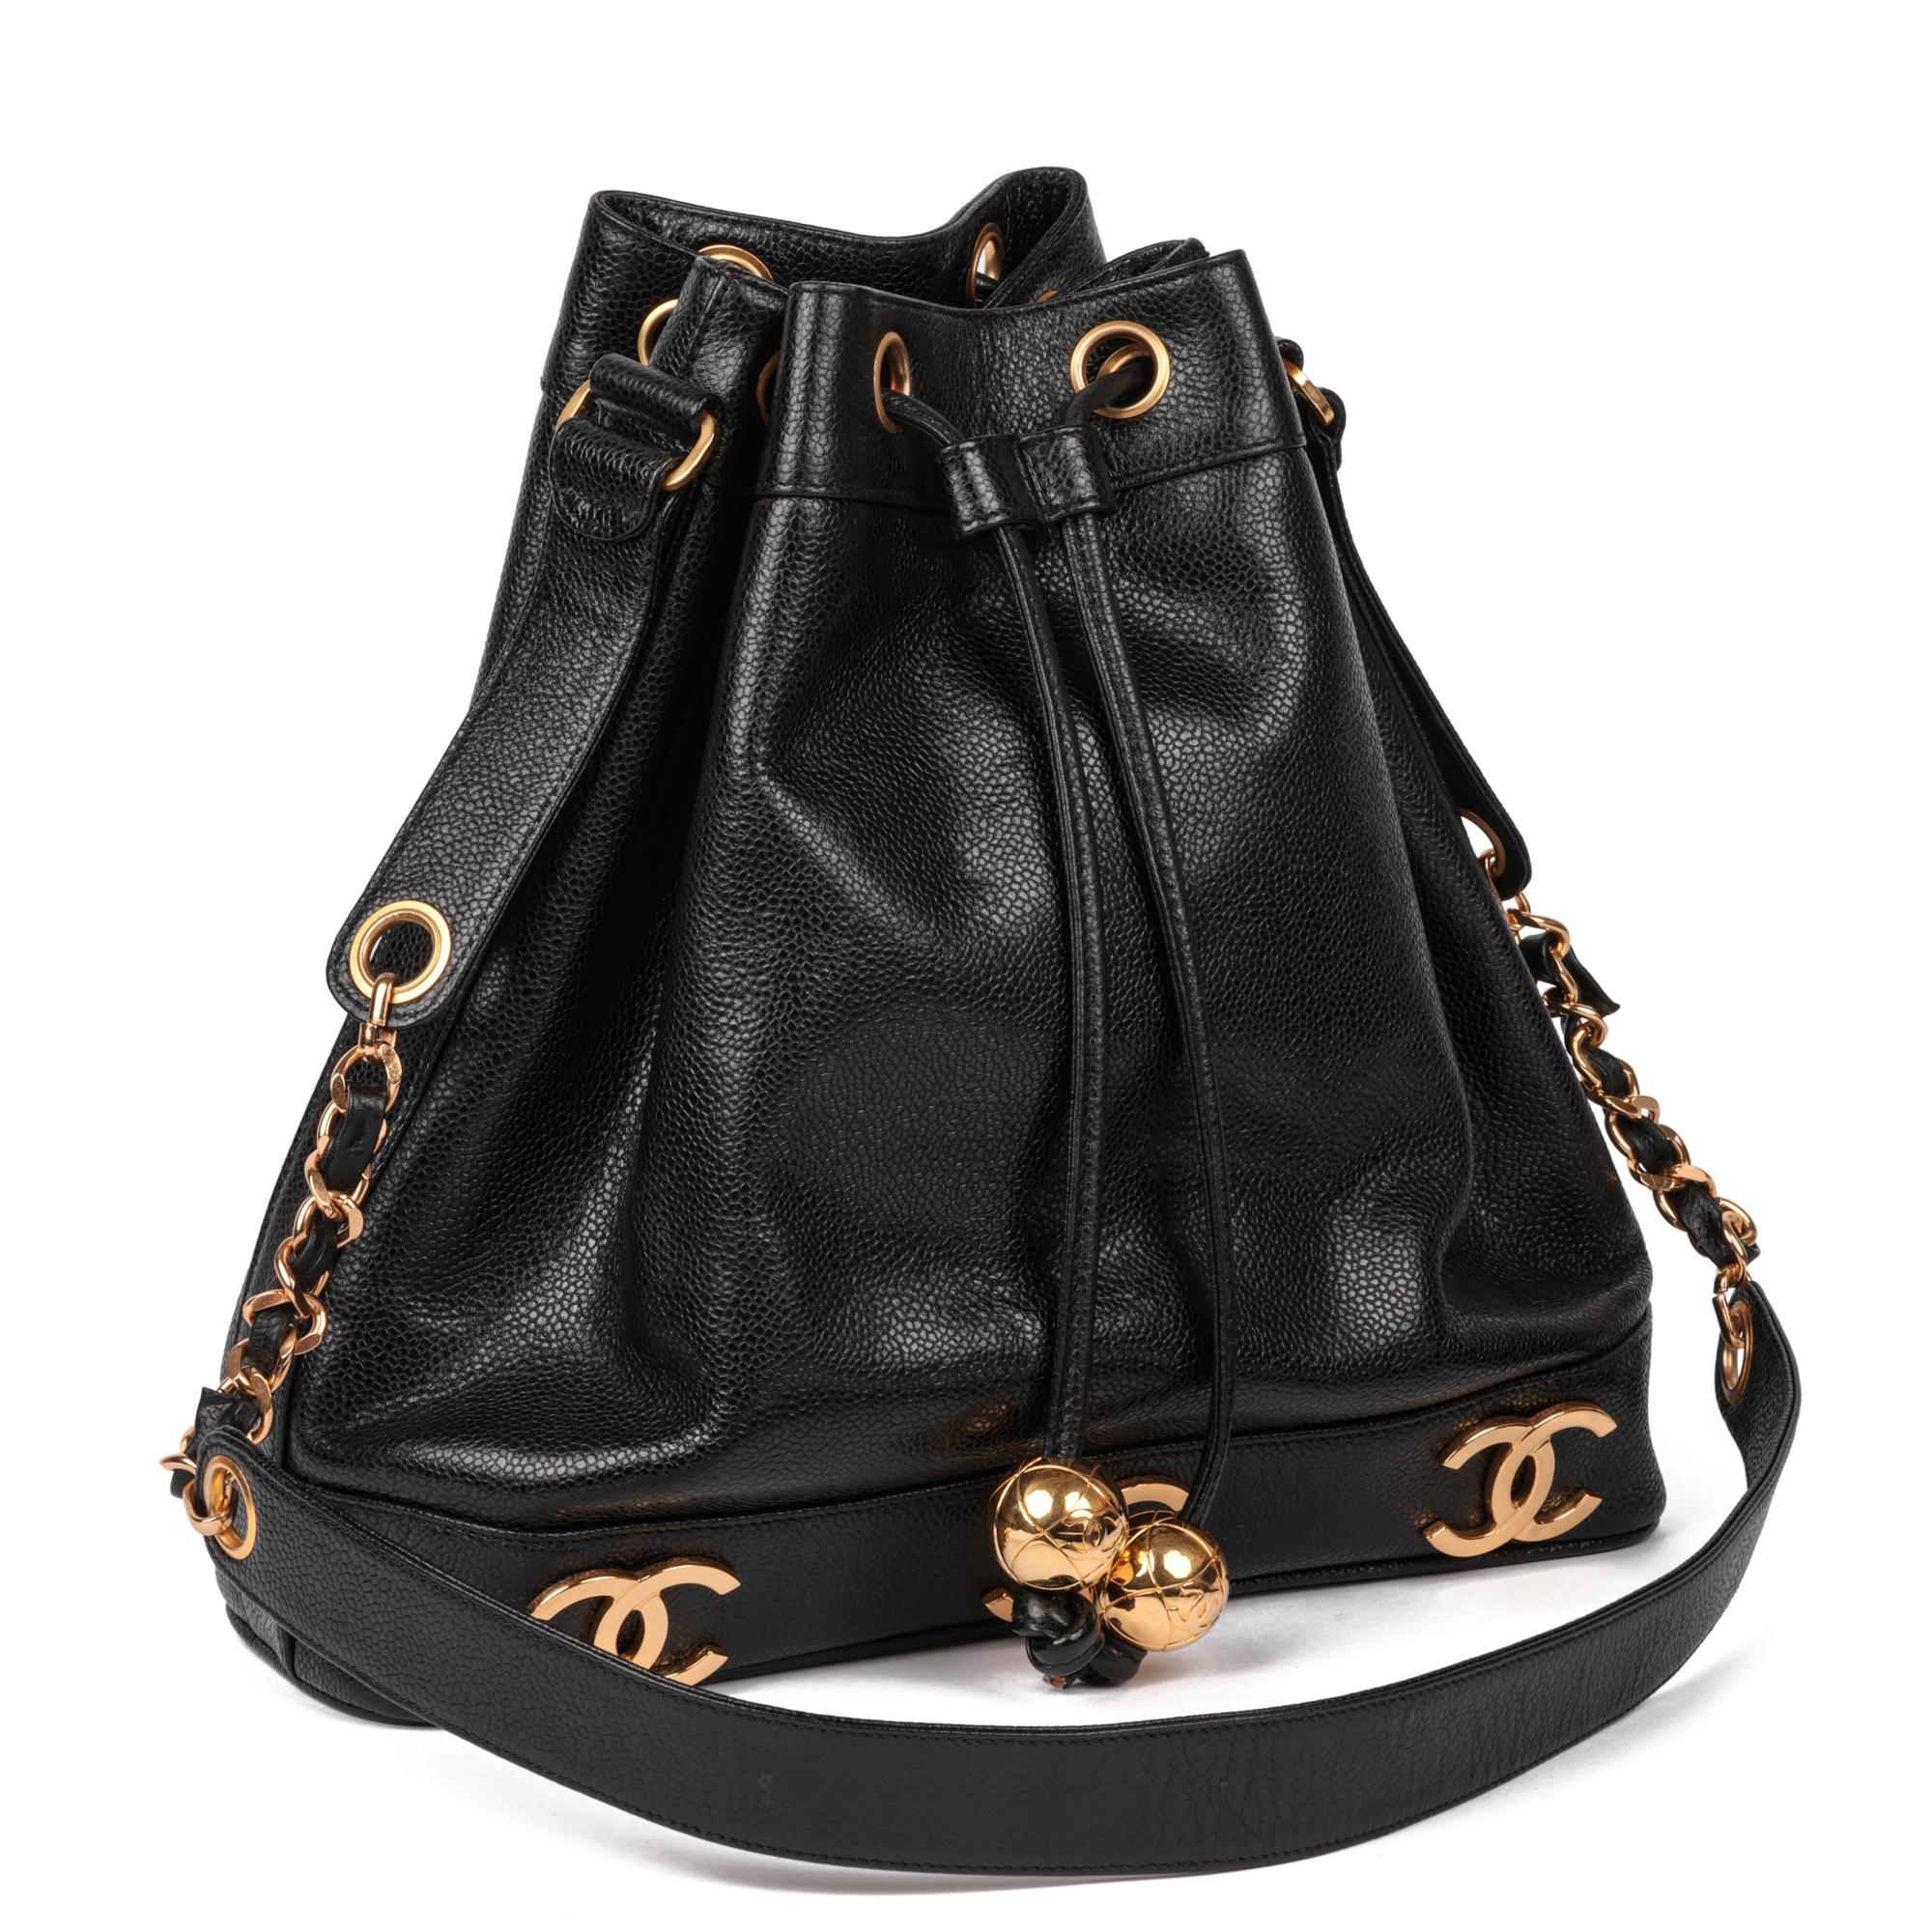 CHANEL
Black Caviar Leather Vintage Classic Logo Trim Bucket Bag with Pouch

Xupes Reference: HB5218
Serial Number: 3621255
Age (Circa): 1994
Accompanied By: Chanel Dust Bag, Care Booklet
Authenticity Details: Serial Sticker (Made in Italy)
Gender: